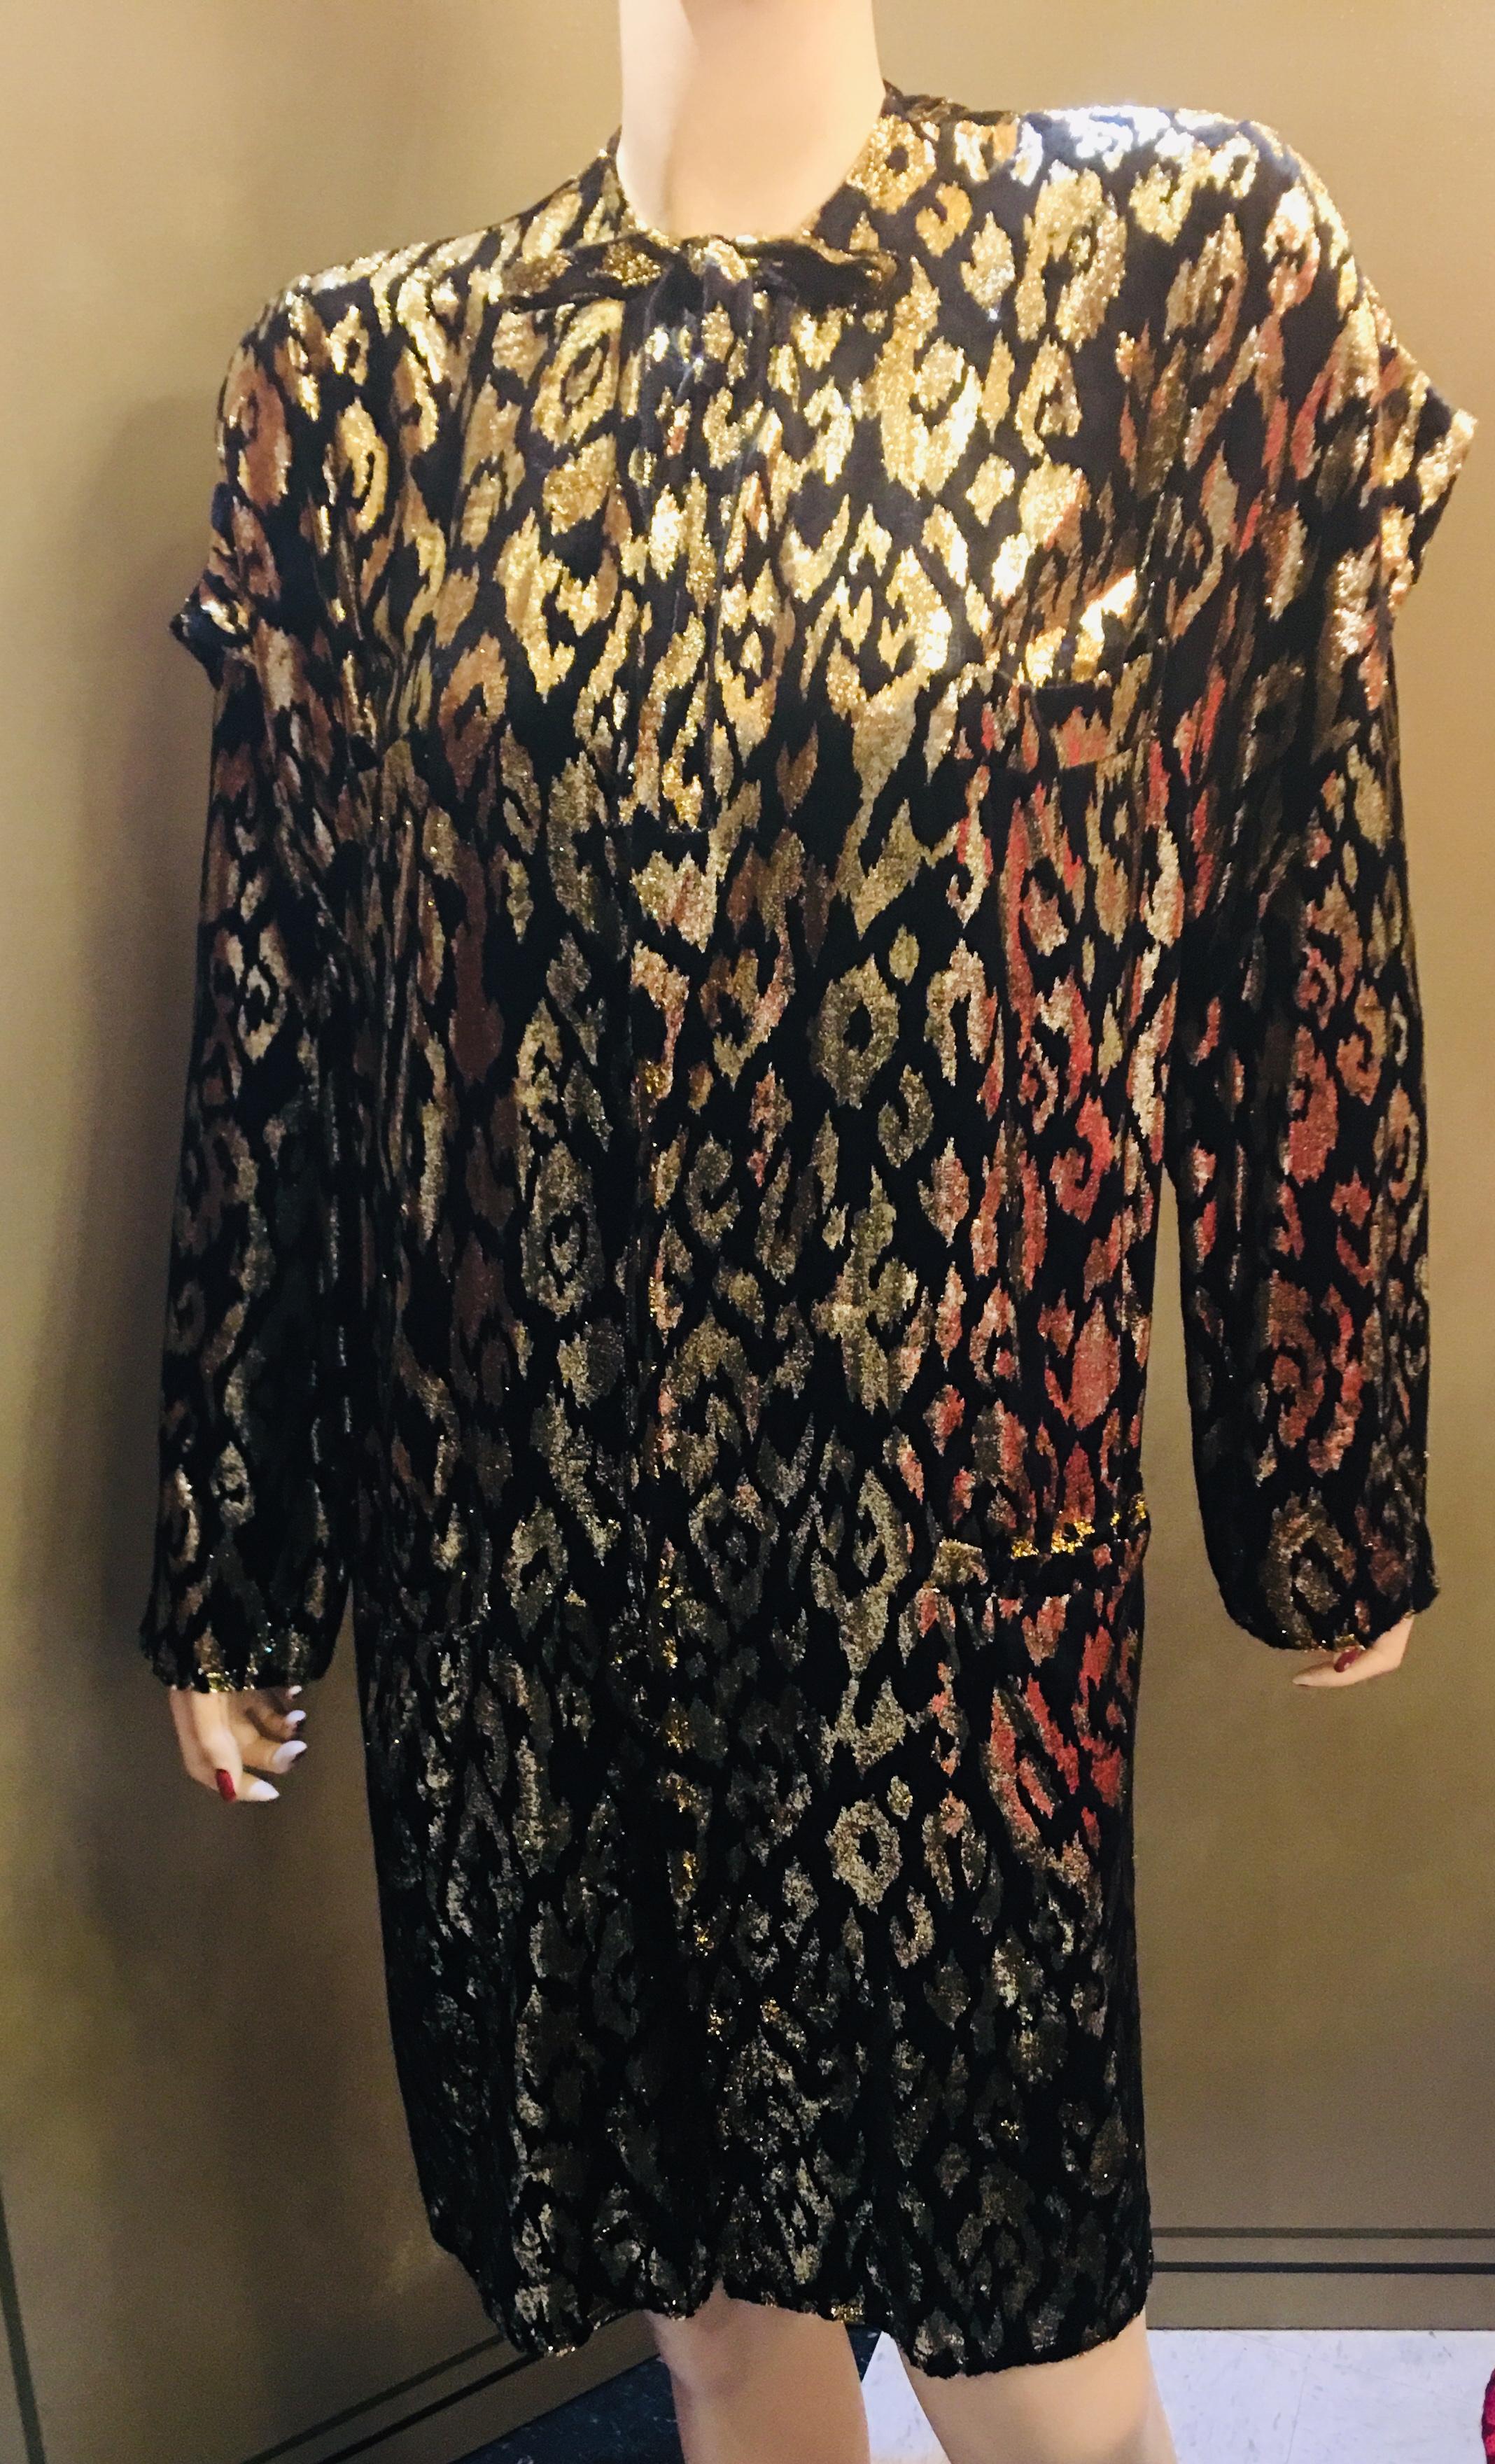 Exquisite 1980's evening wear coat, jacket, blazer or duster is lightweight, vented and easy to wear for dining, parties and dancing, with an animal patterned, soft silk velvet and shiny gold lame metallic velvet effect.  Collarless coat features